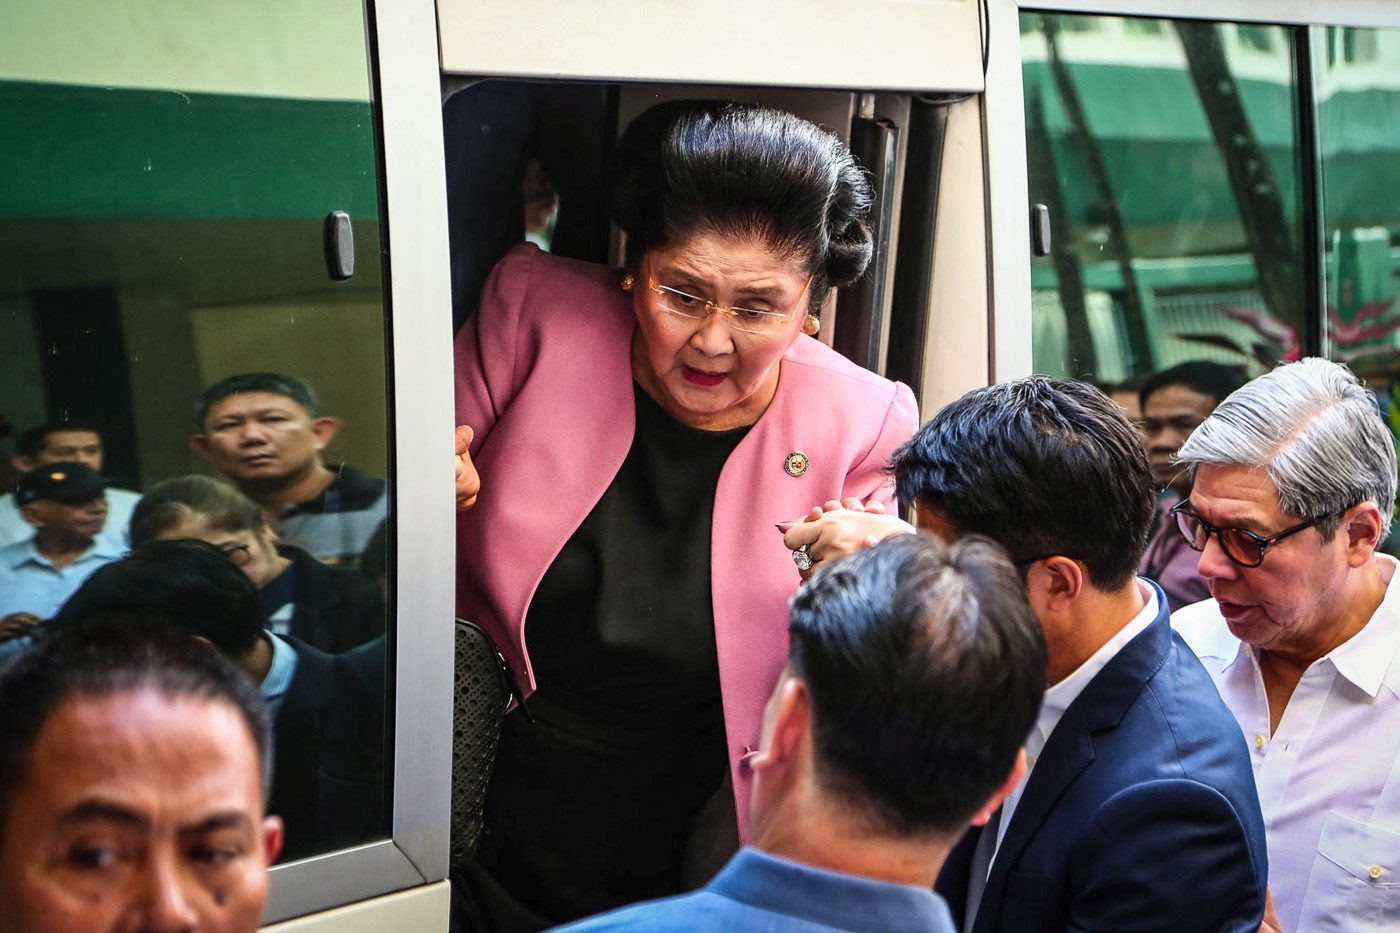 Court keeps Imelda Marcos free while deciding post-conviction bail